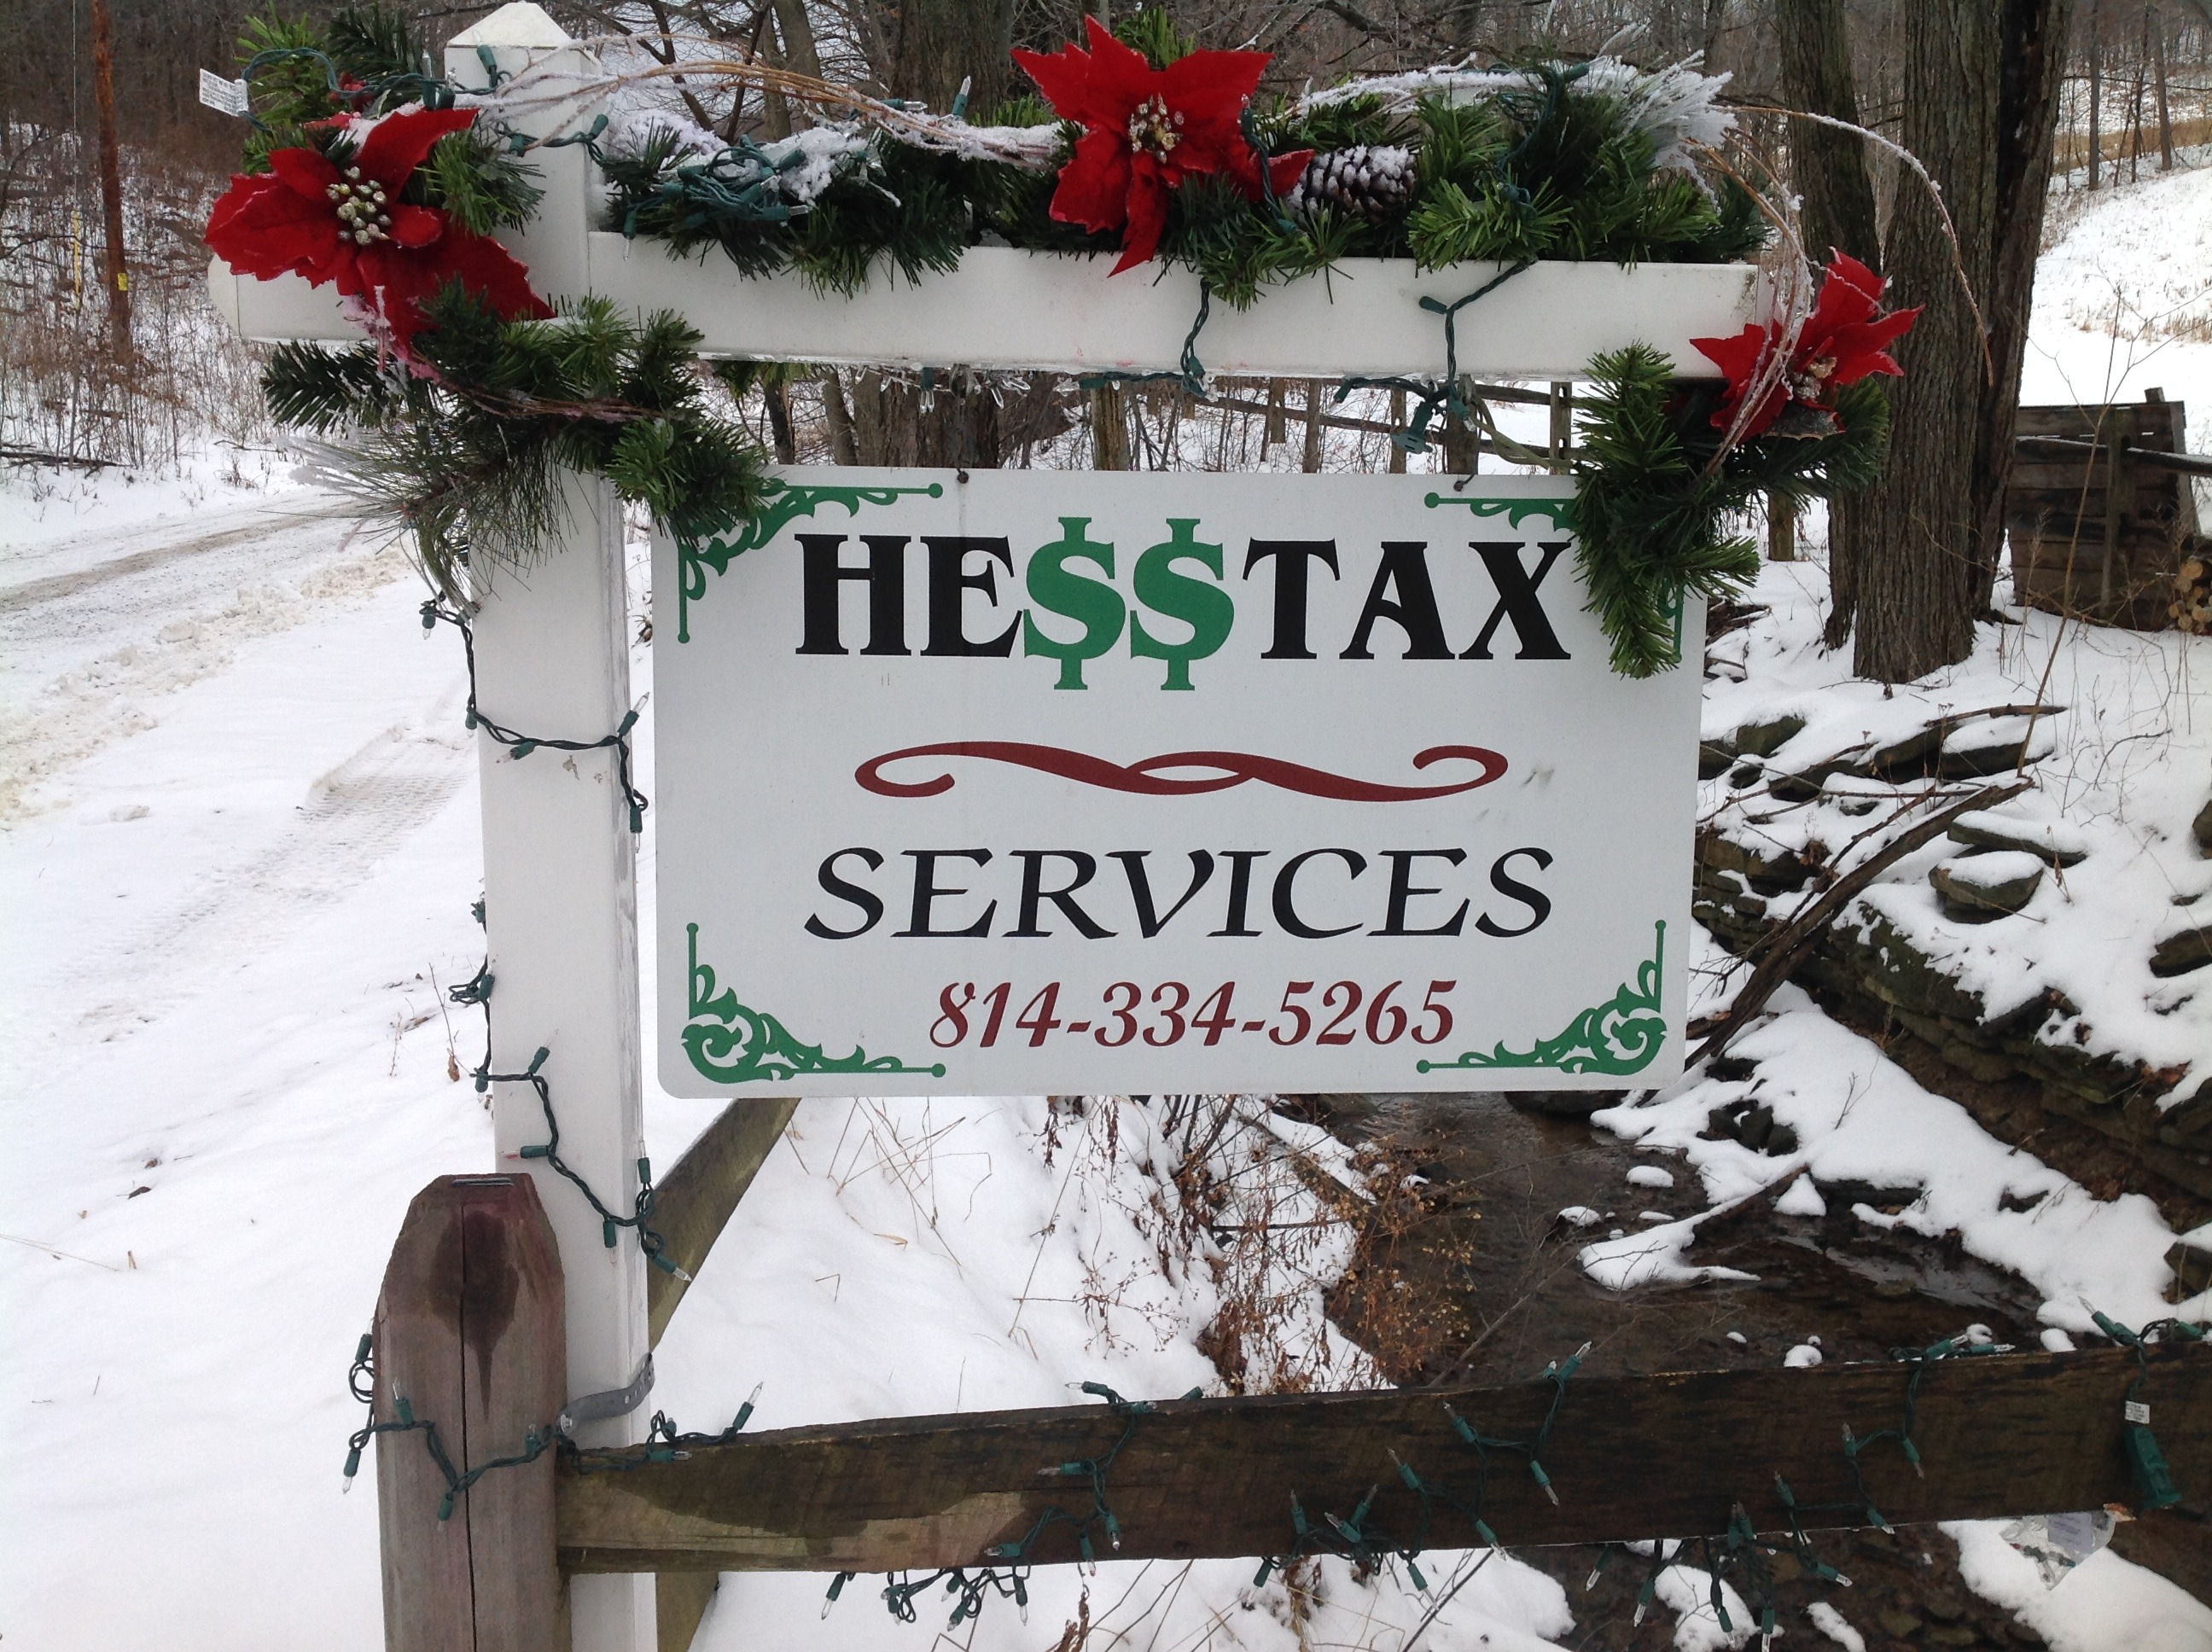 Tax Preparers and Tax Attorneys HE$$ TAX SERVICE in WESTFIELD PA